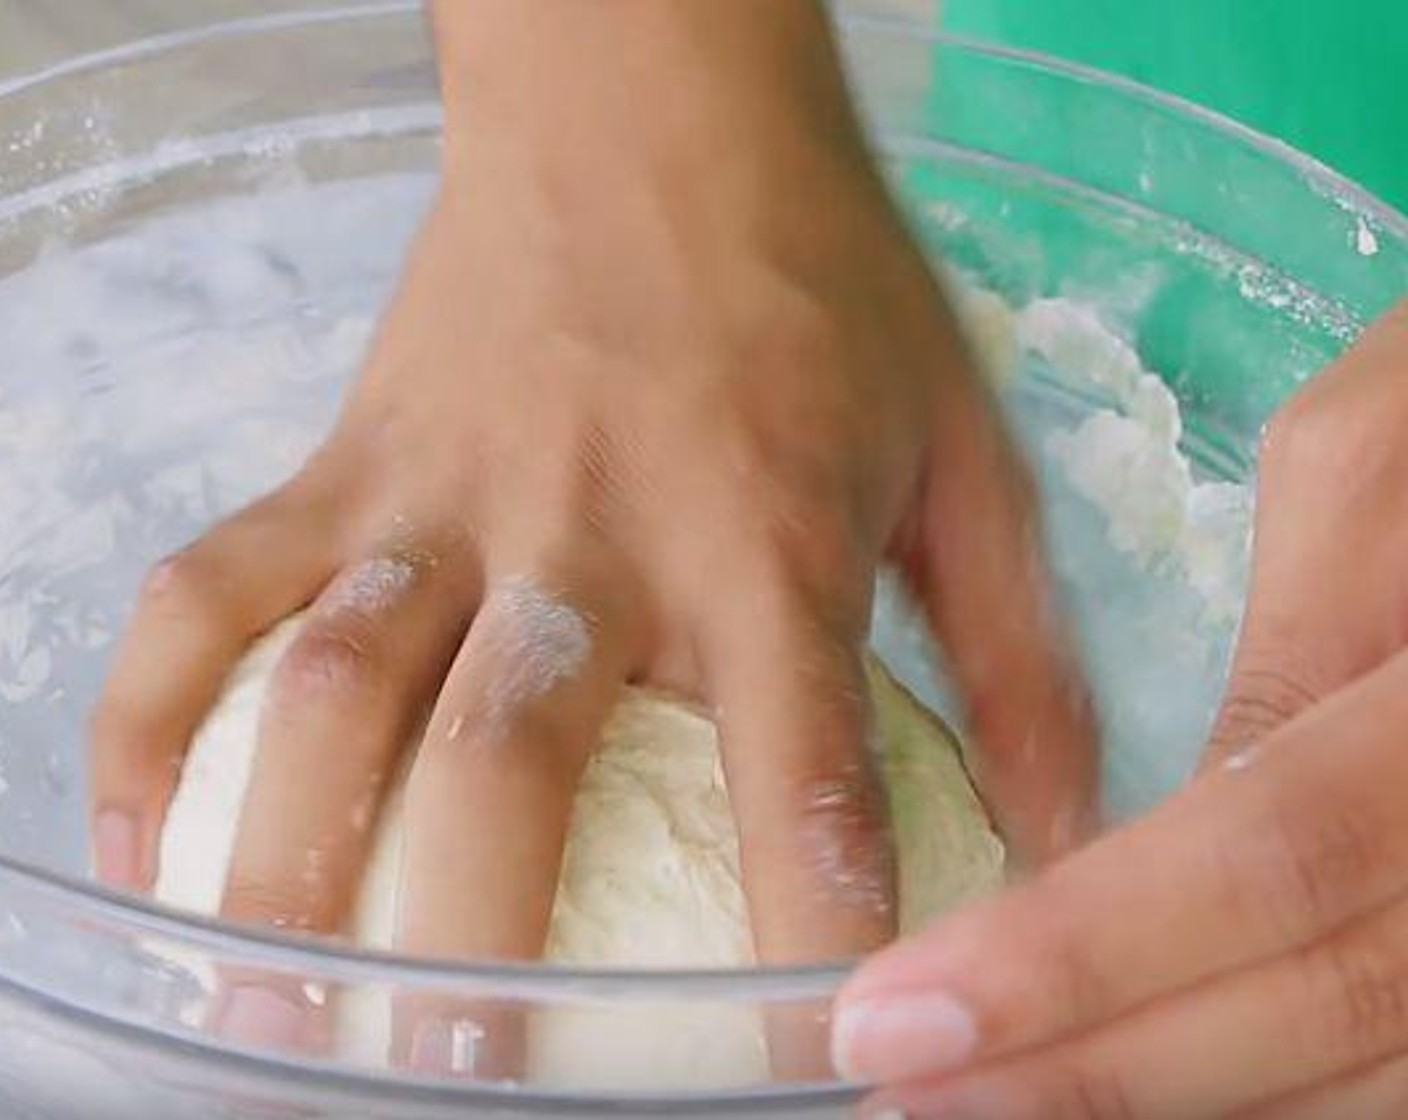 step 3 In a large bowl with All-Purpose Flour (2 cups), add Salt (1 tsp) and mix. Add the wet ingredients. Using a fork or spoon, mix the wet and dry together until the mixture is no longer wet. Bring together and knead the dough for about 3 minutes or until soft.